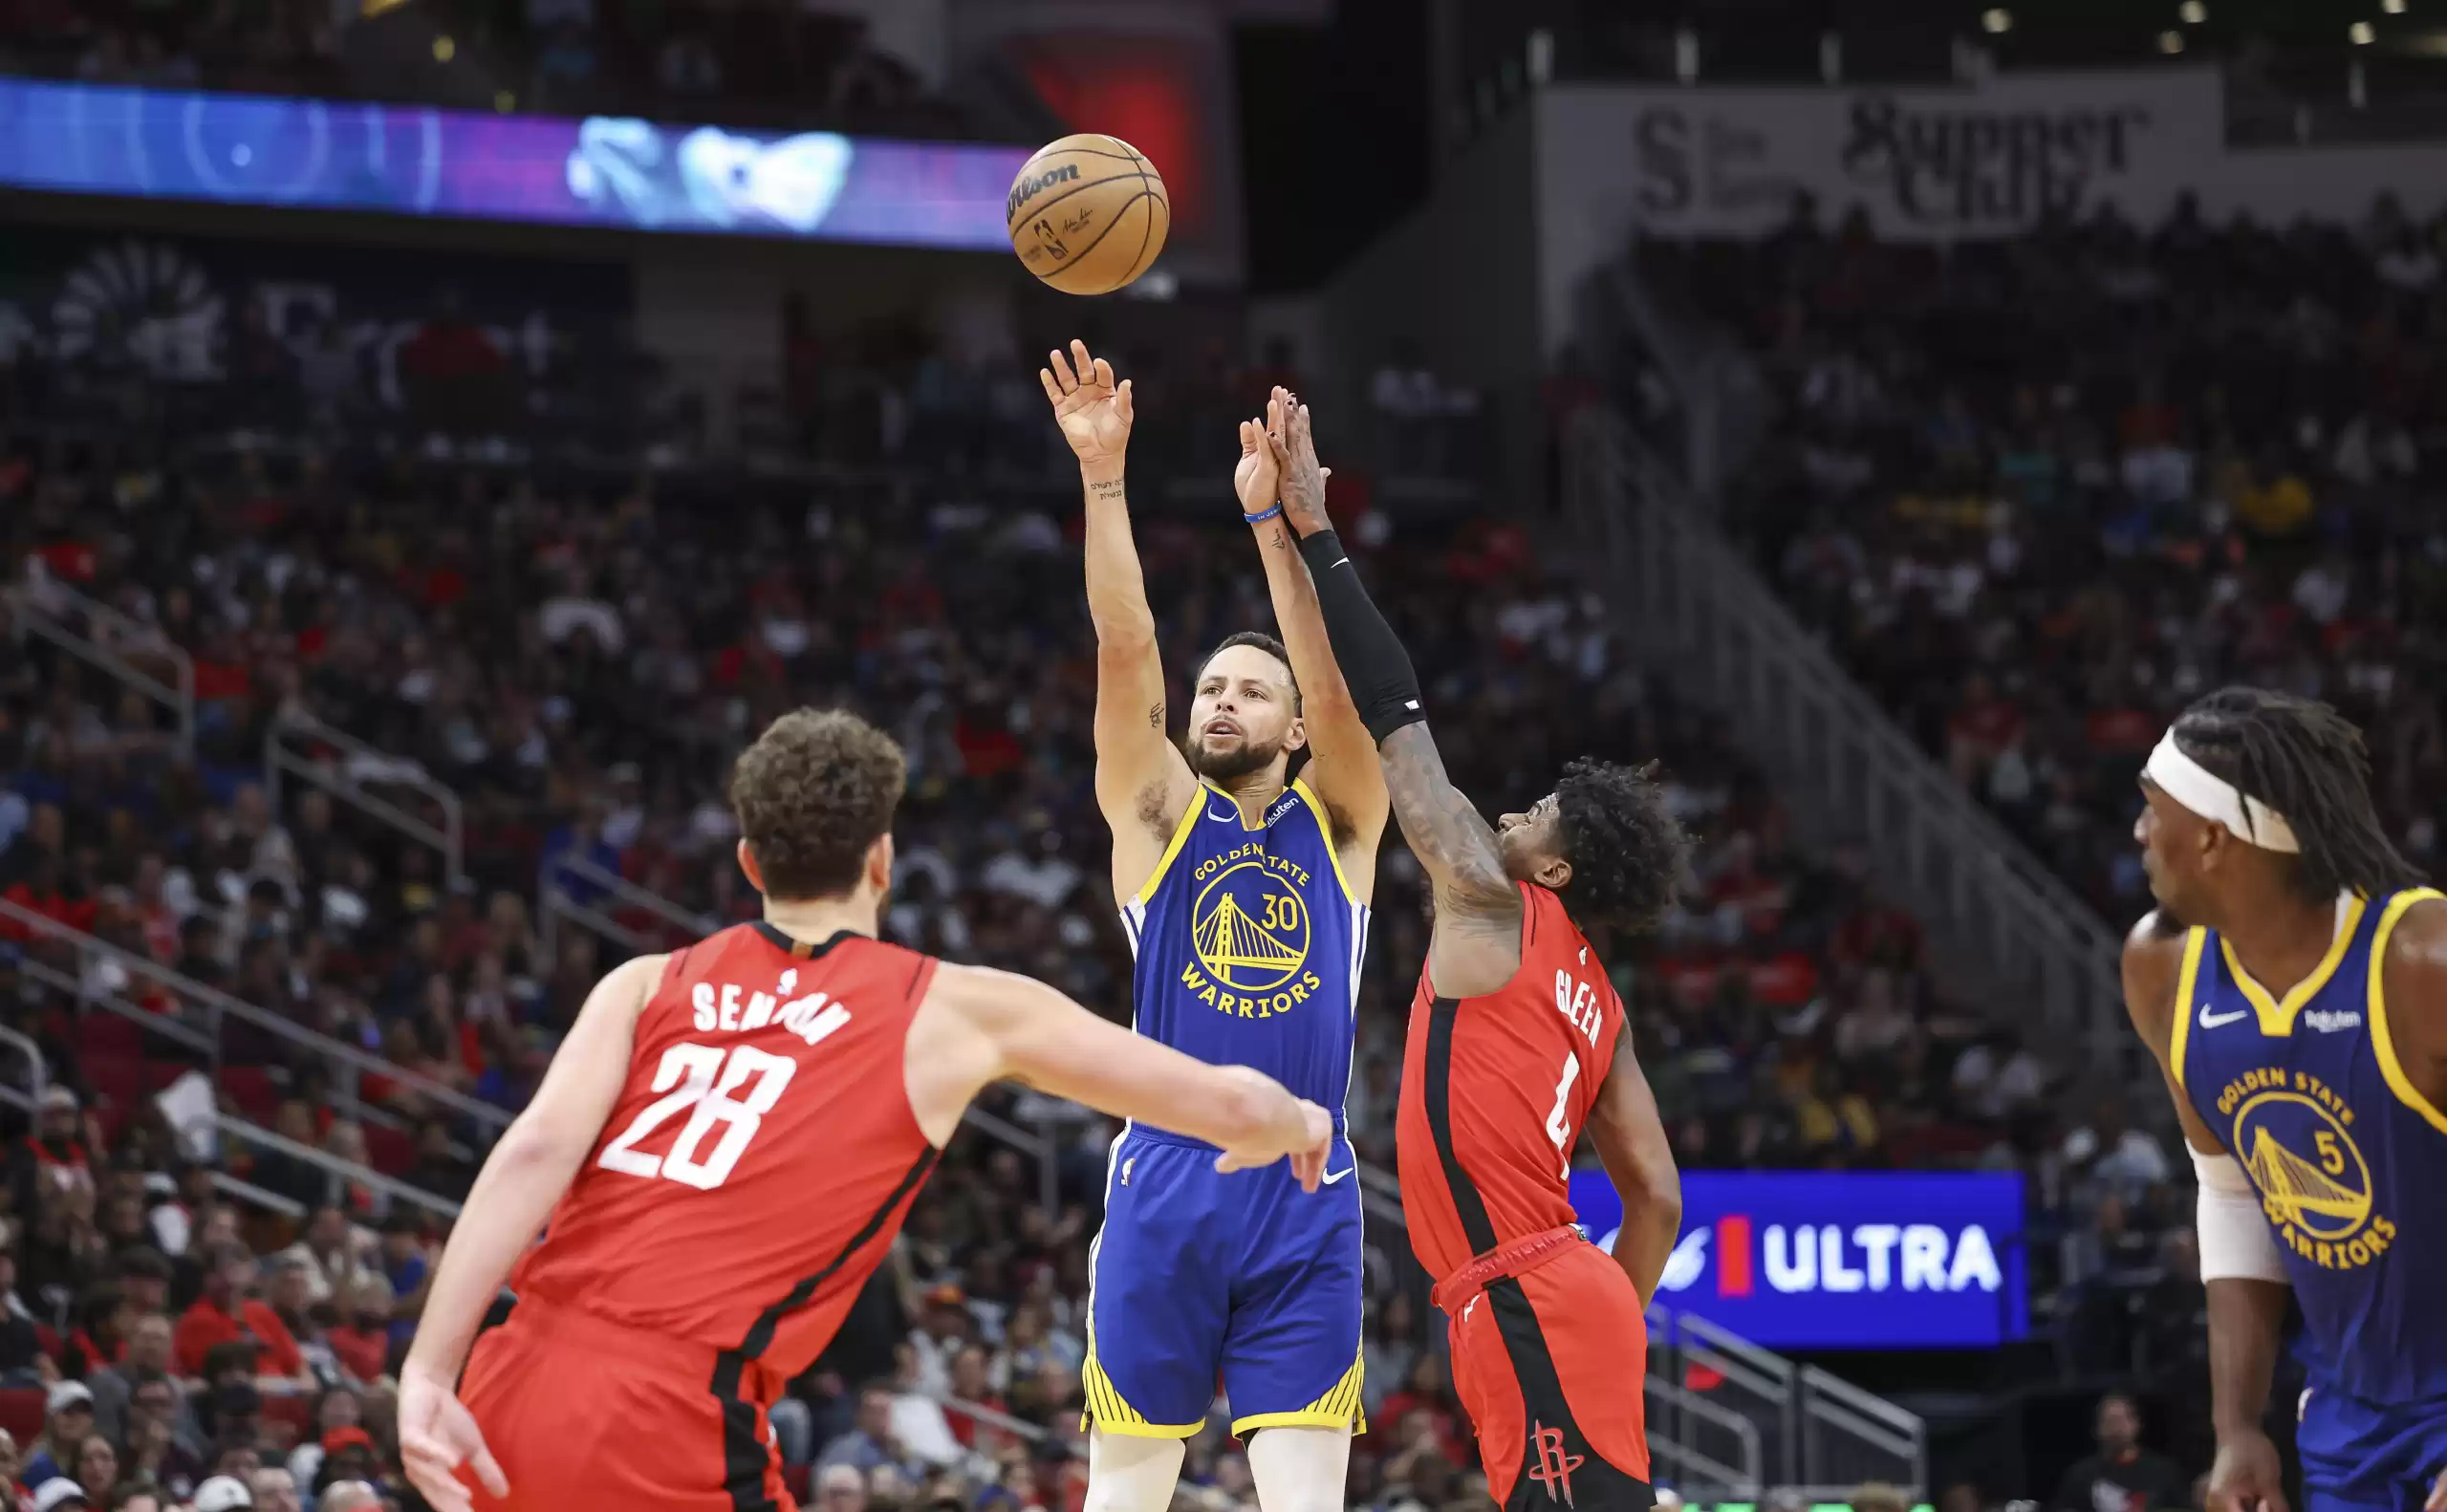 Draymond Green's comeback propels Warriors to a 106-95 victory against Rockets